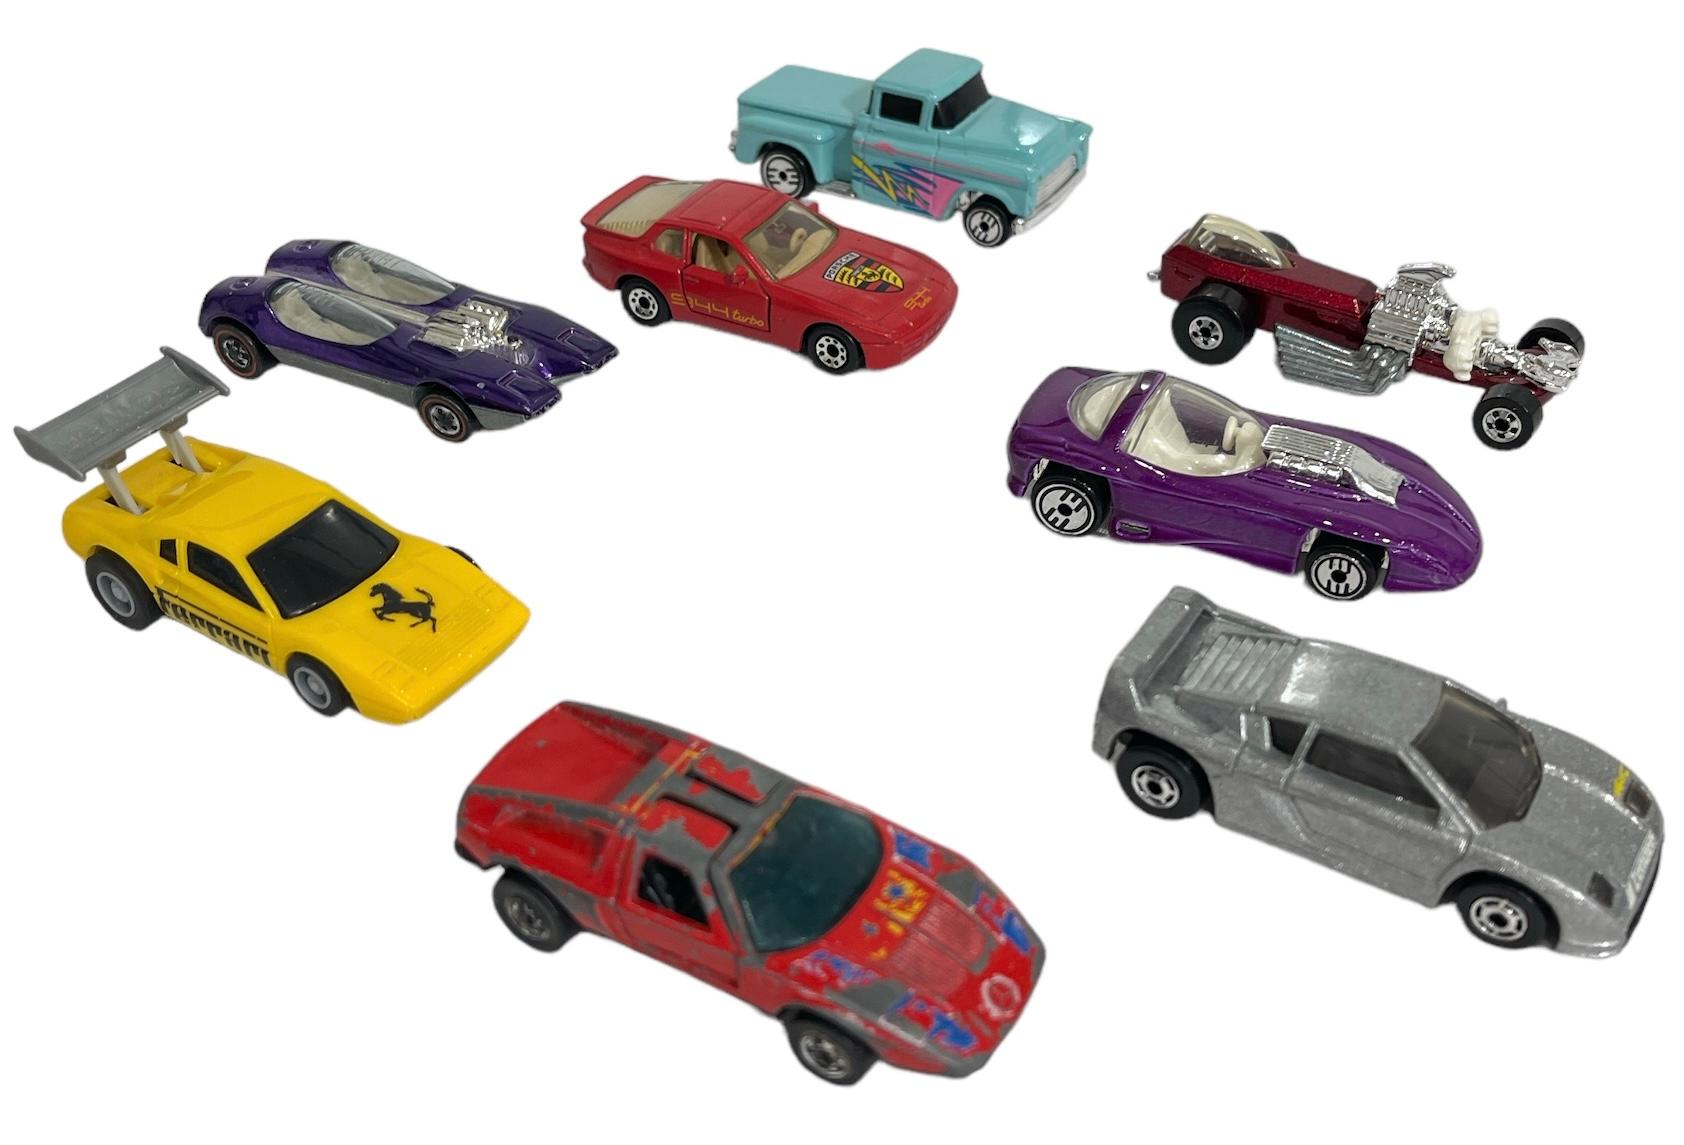 Vintage Hot Wheels with a REDLINE Hot Wheels Collection